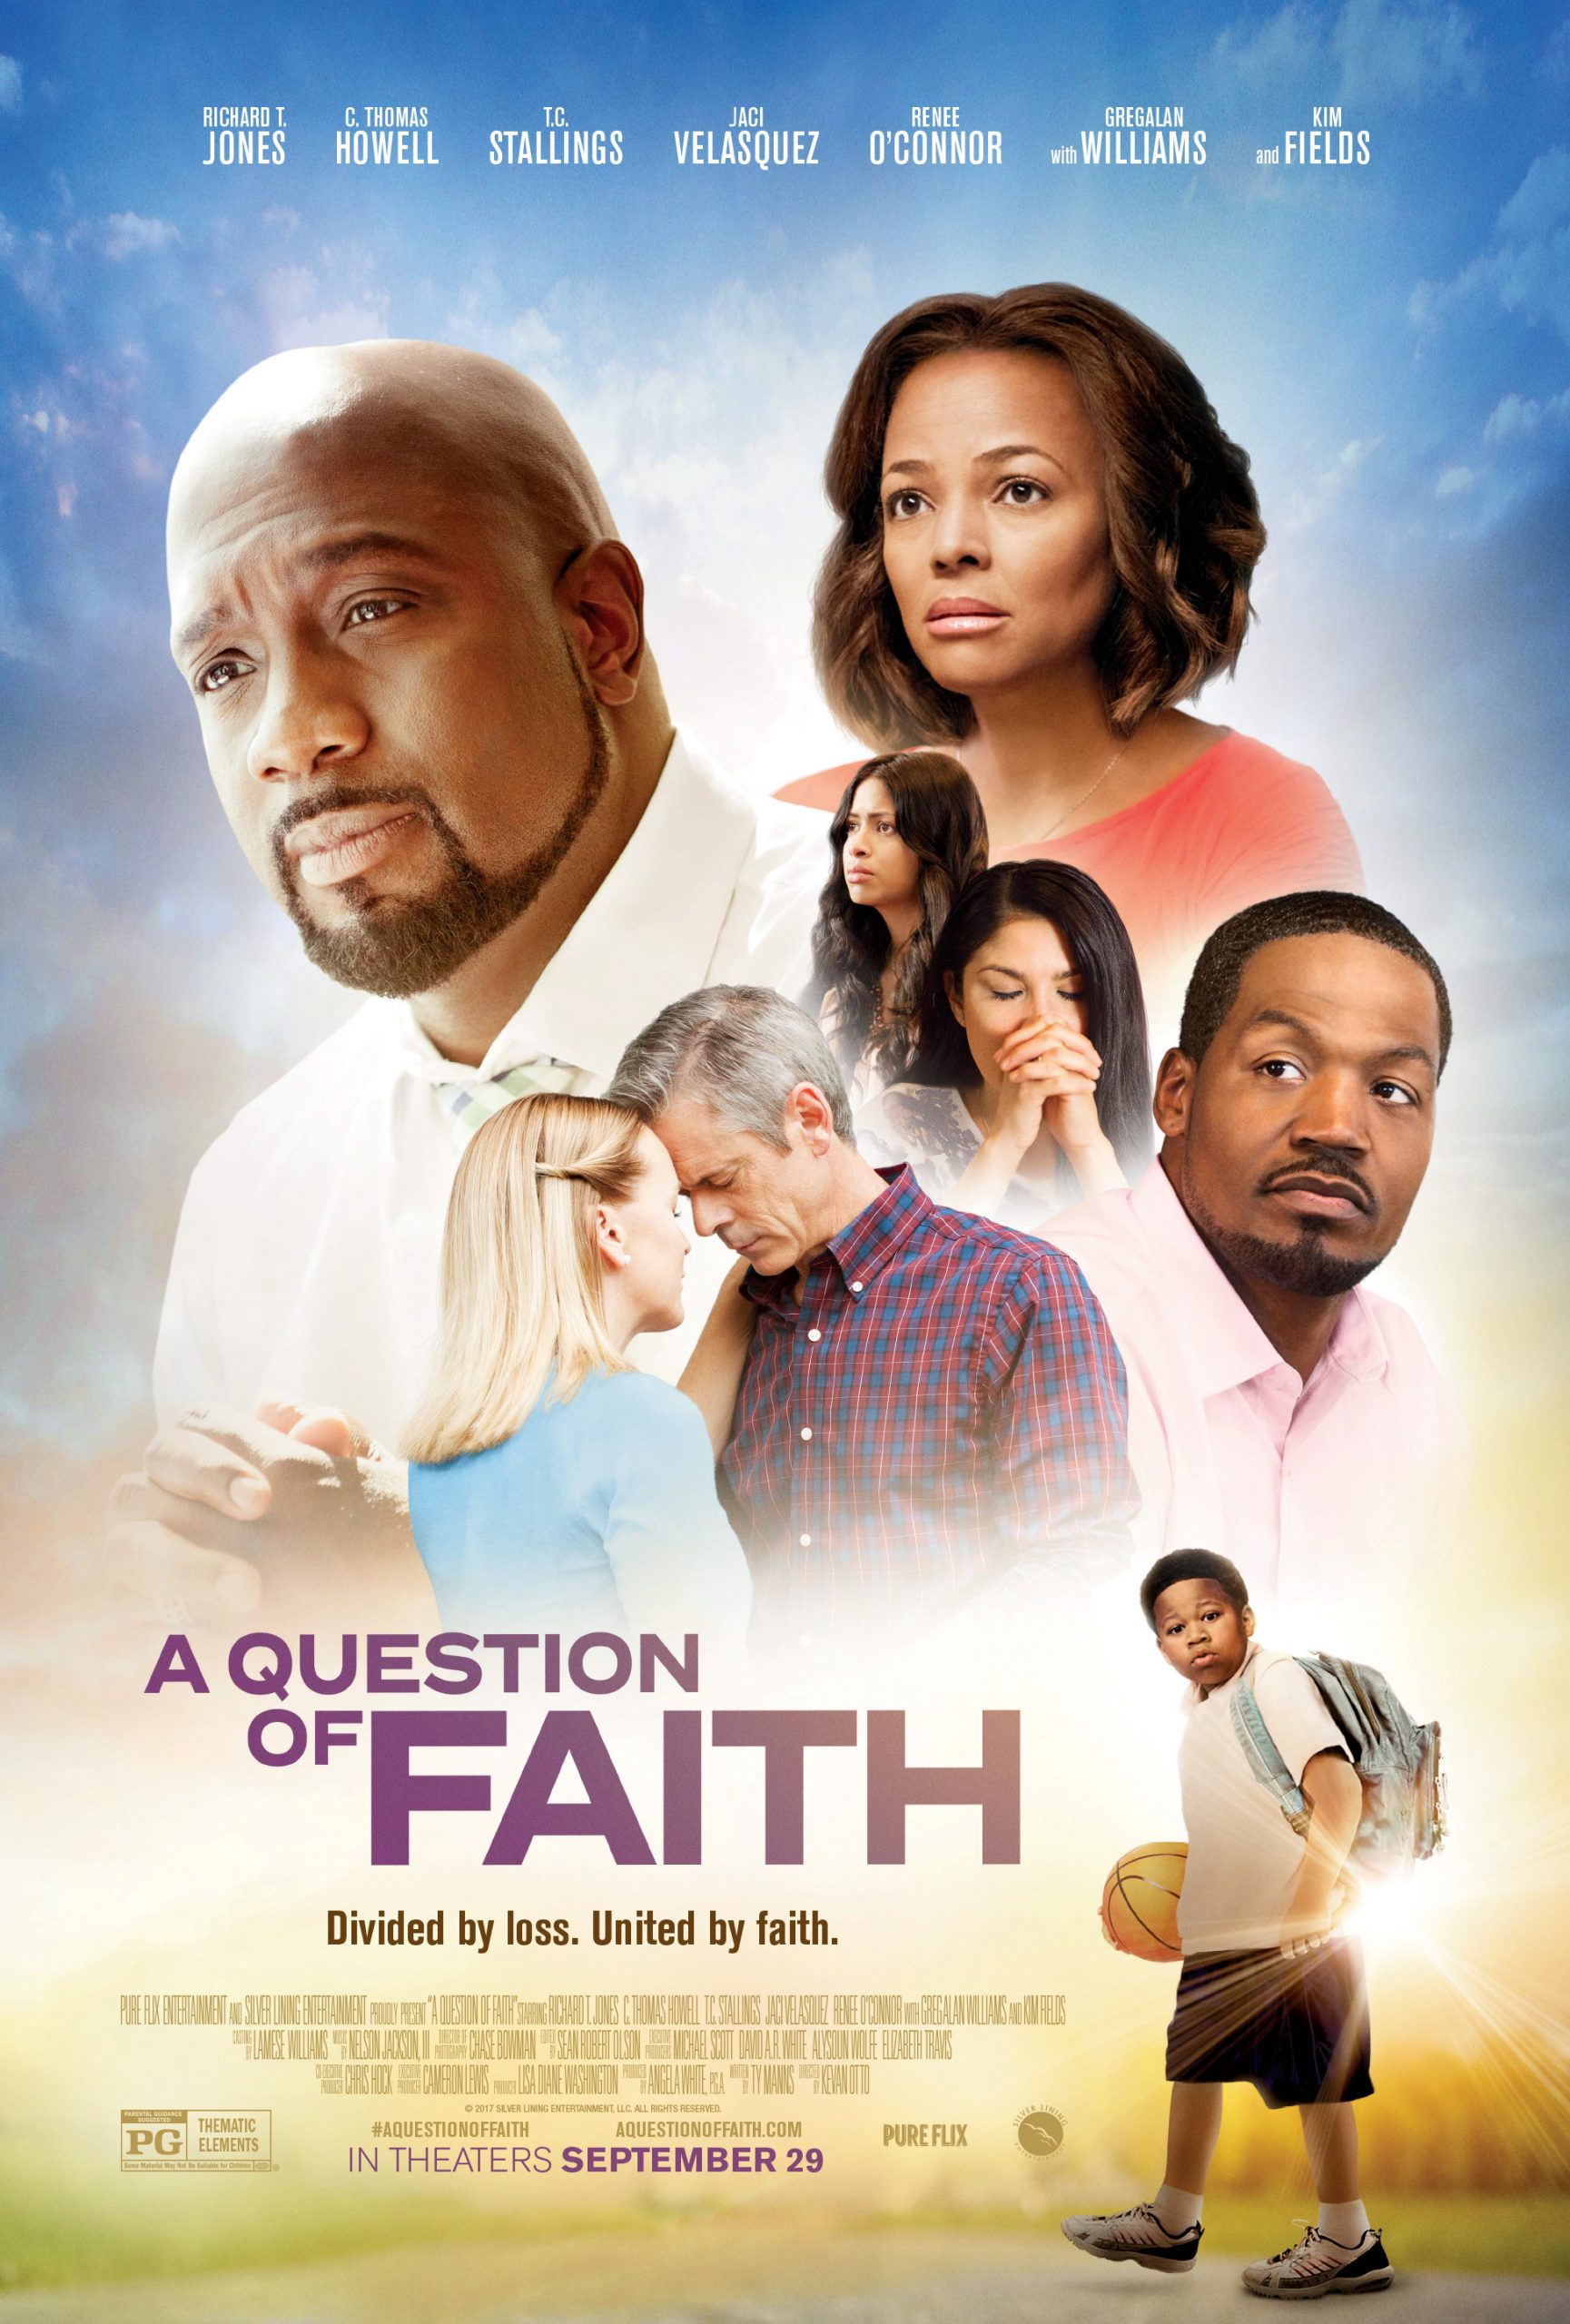 [DOWNLOAD] 6 Christian Movies For The Family As You STAY AT HOME